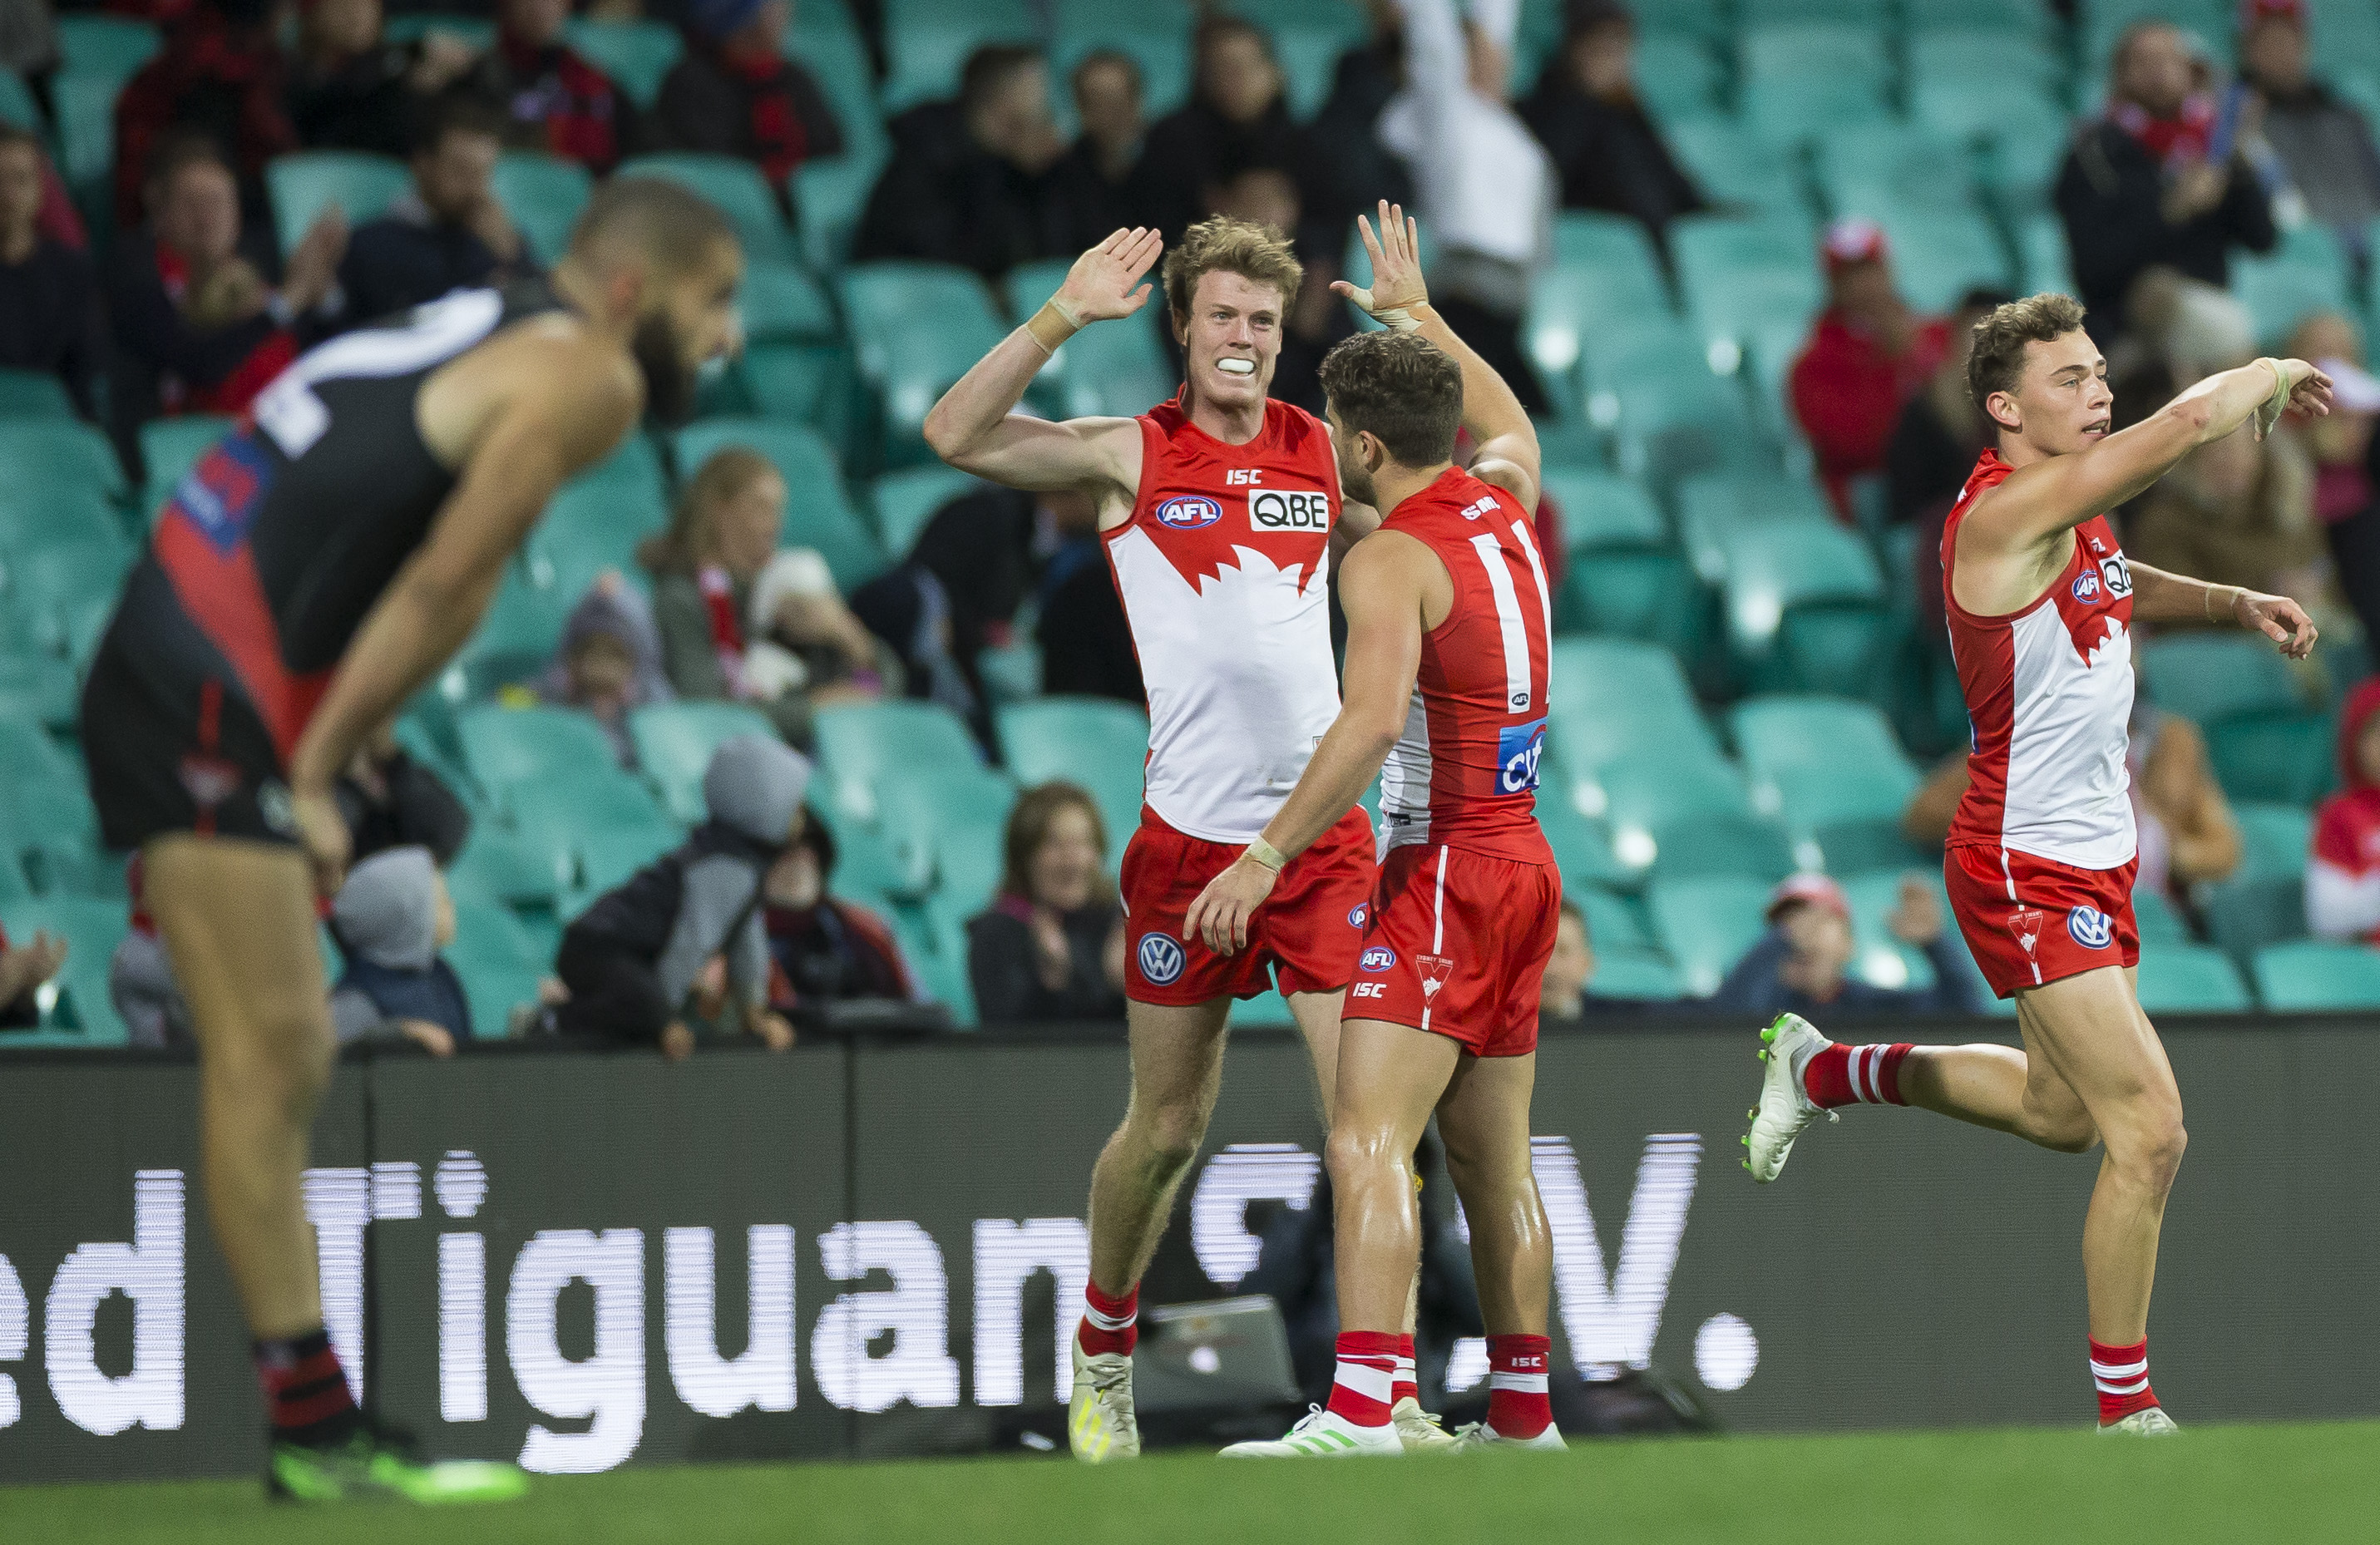 Article image for Swans defeat Dons in nail-biter match